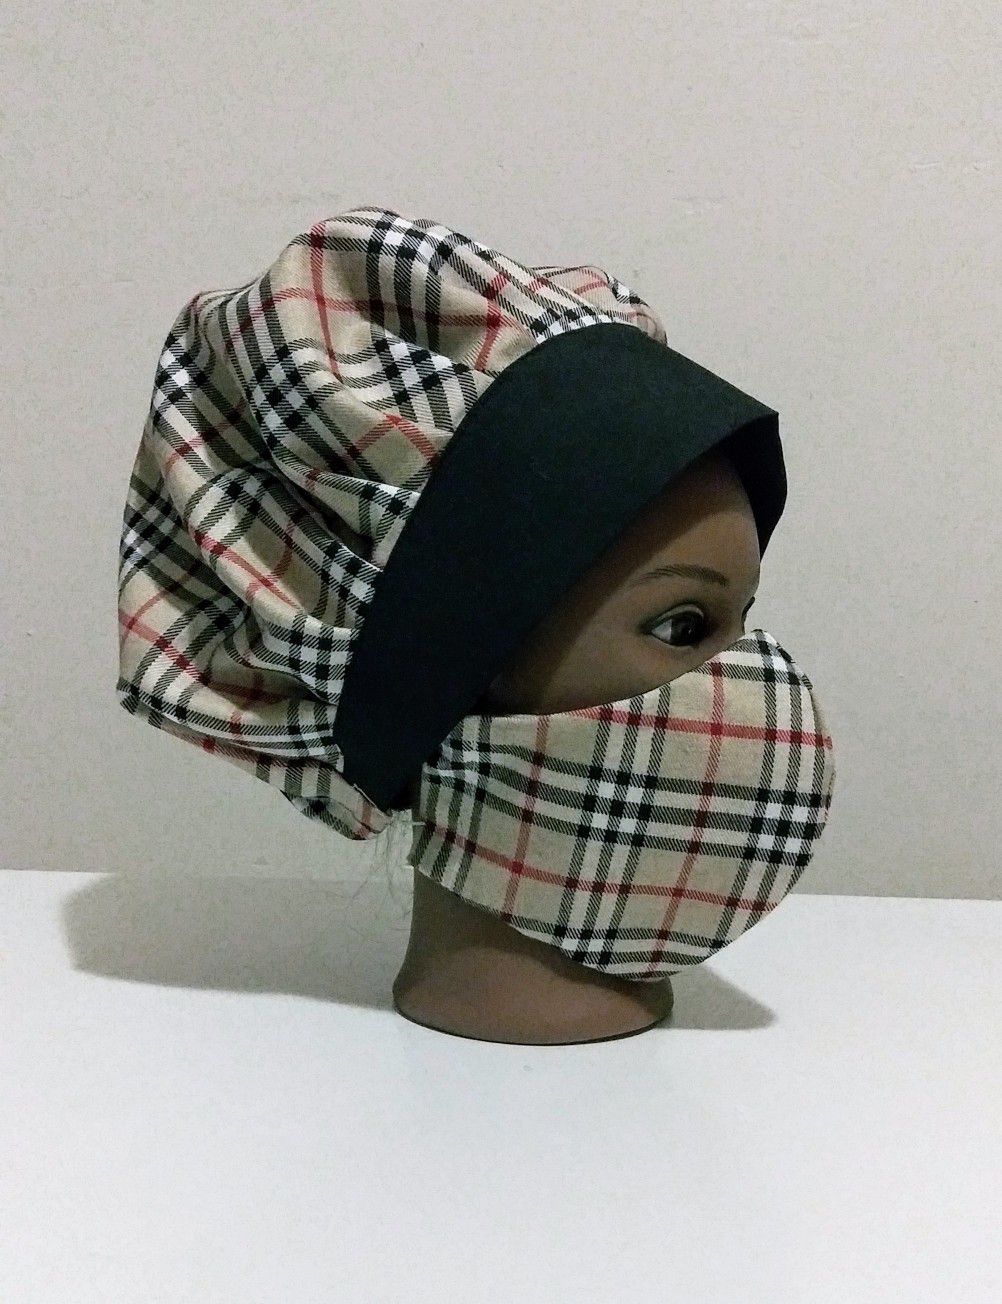 Burberry Print Bouffant Scrub Hat/Nurses Cap/Surgical Cap With Elastic And Face Mask With Filter Pocket And Nose Chip